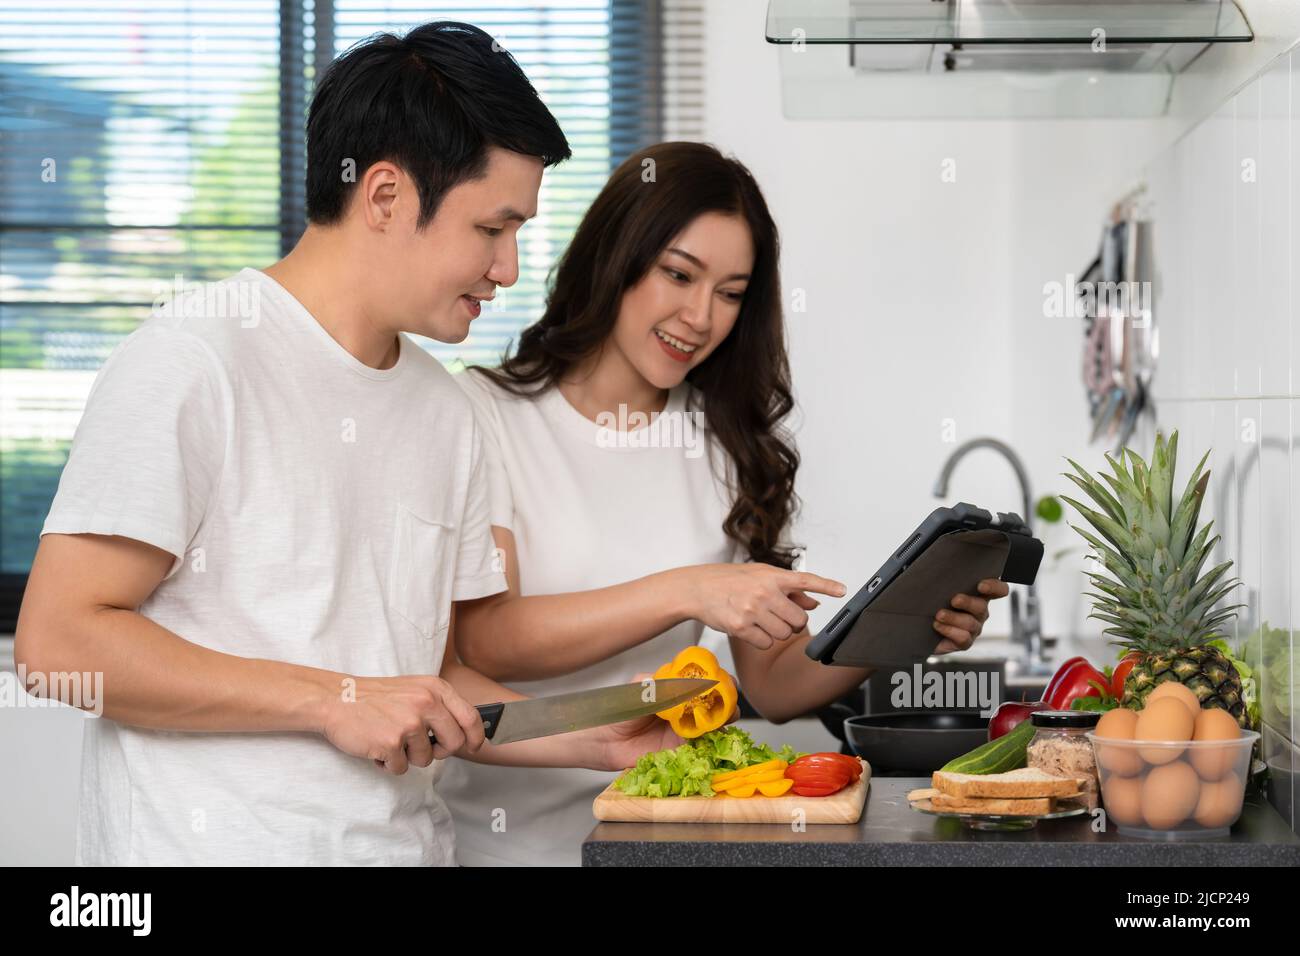 couple cooking and preparing vegetables according to a recipe on a tablet computer in the kitchen at home Stock Photo